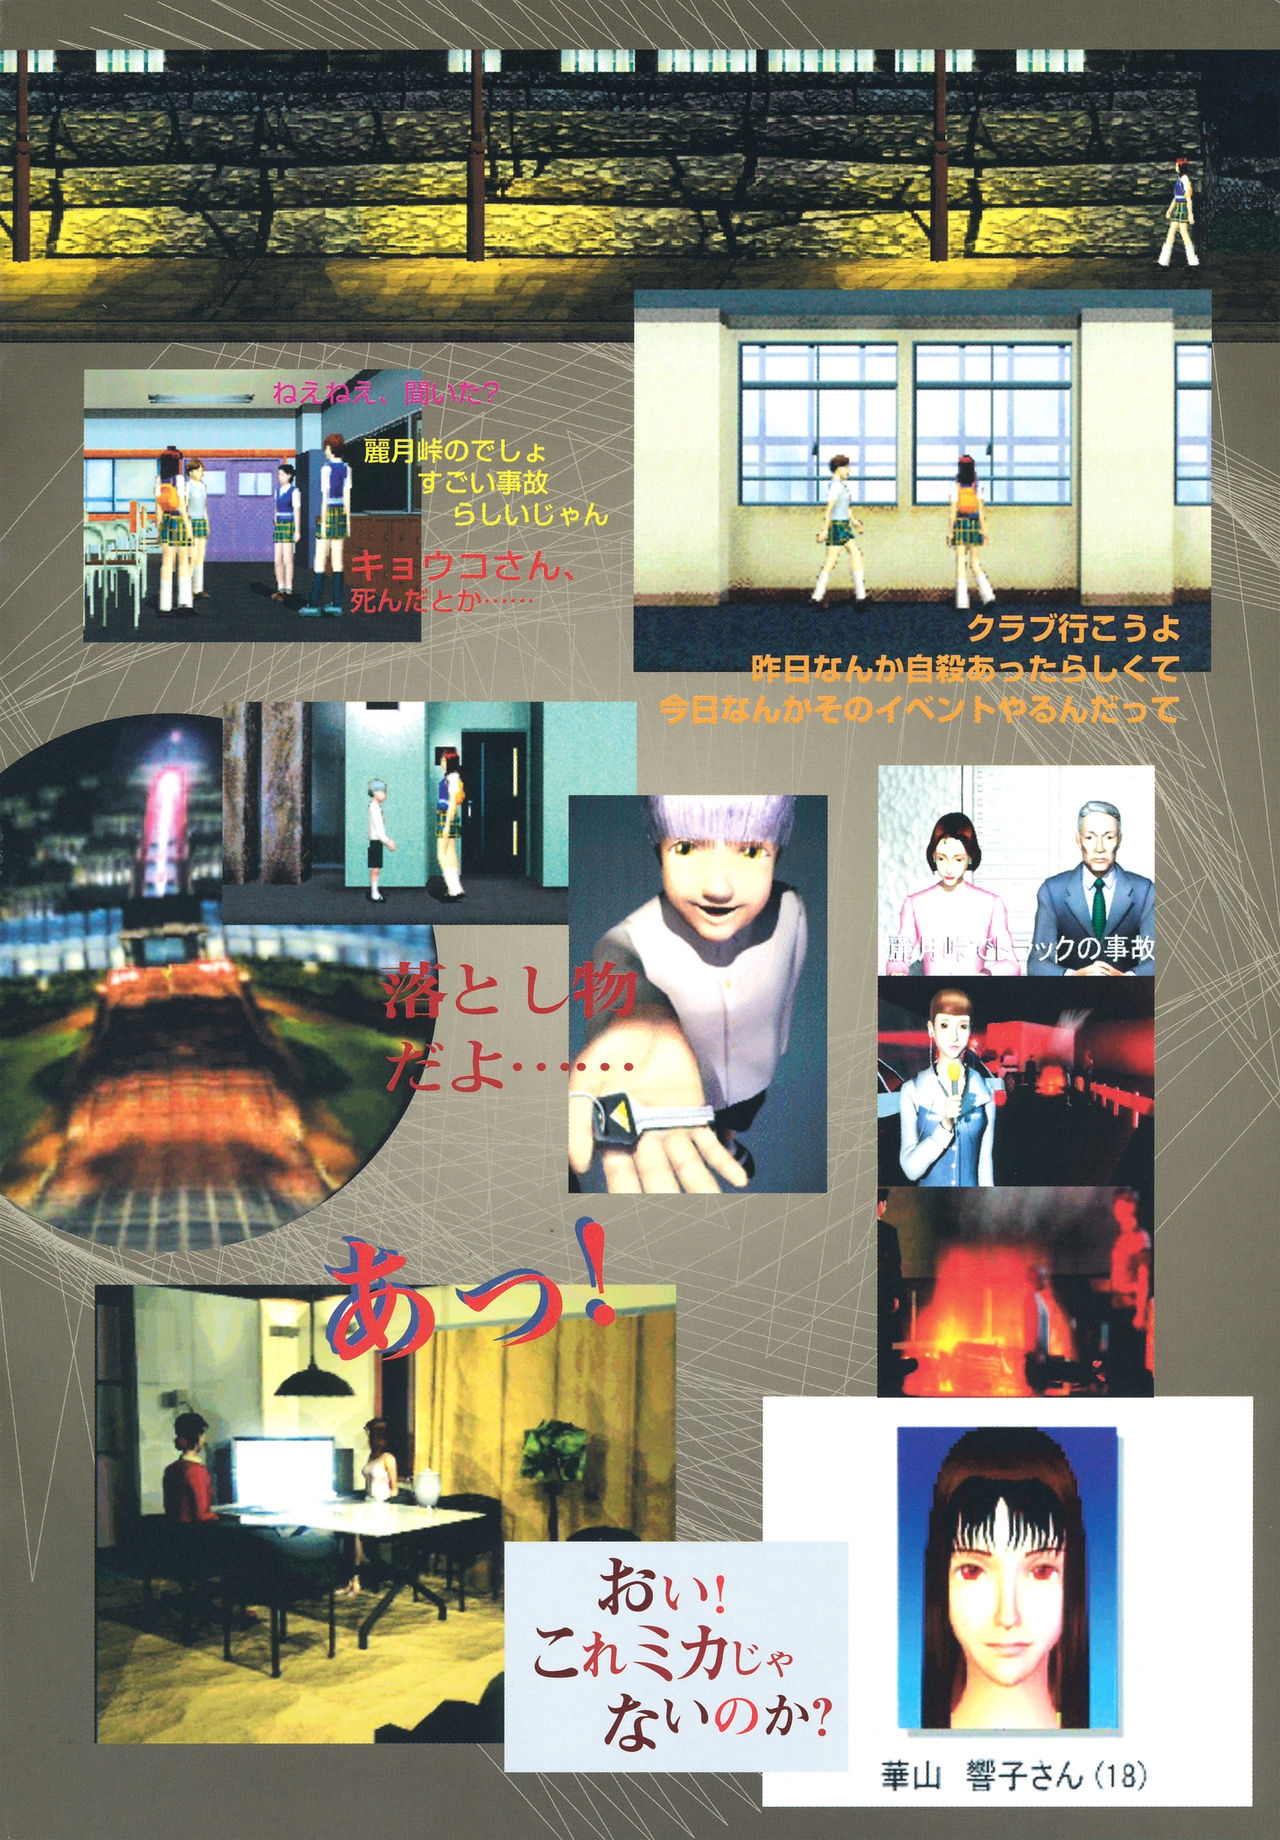 Moonlight Syndrome Visual Guidebook 16